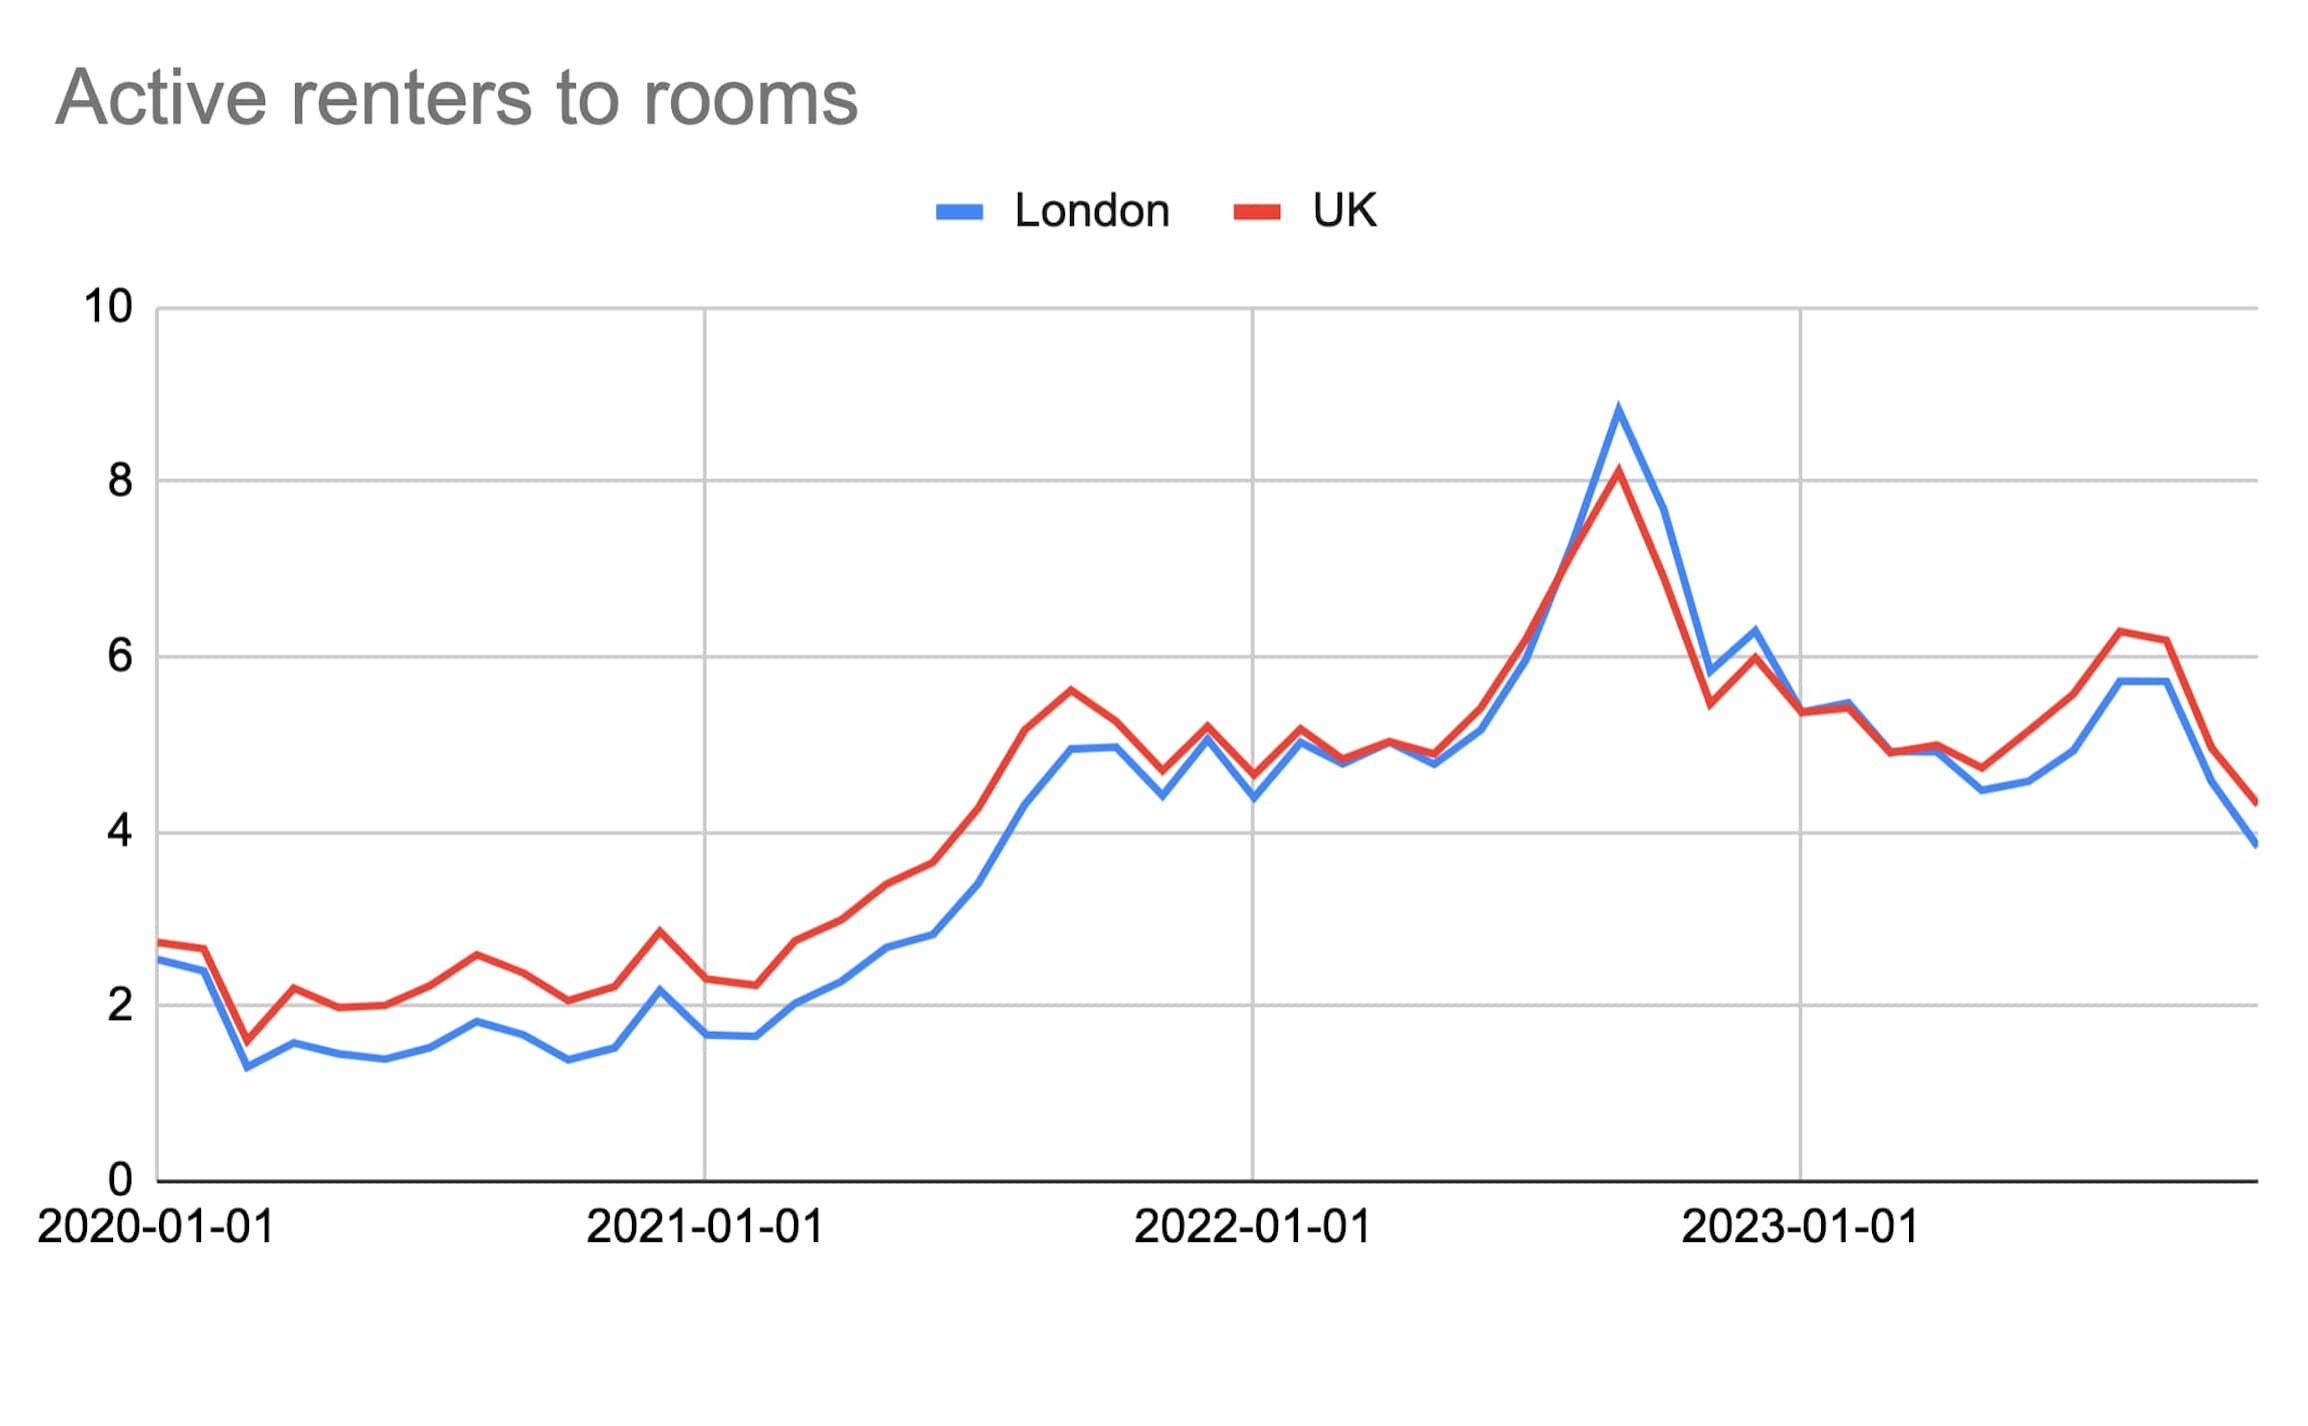 A graph showing the average rents in the UK and London